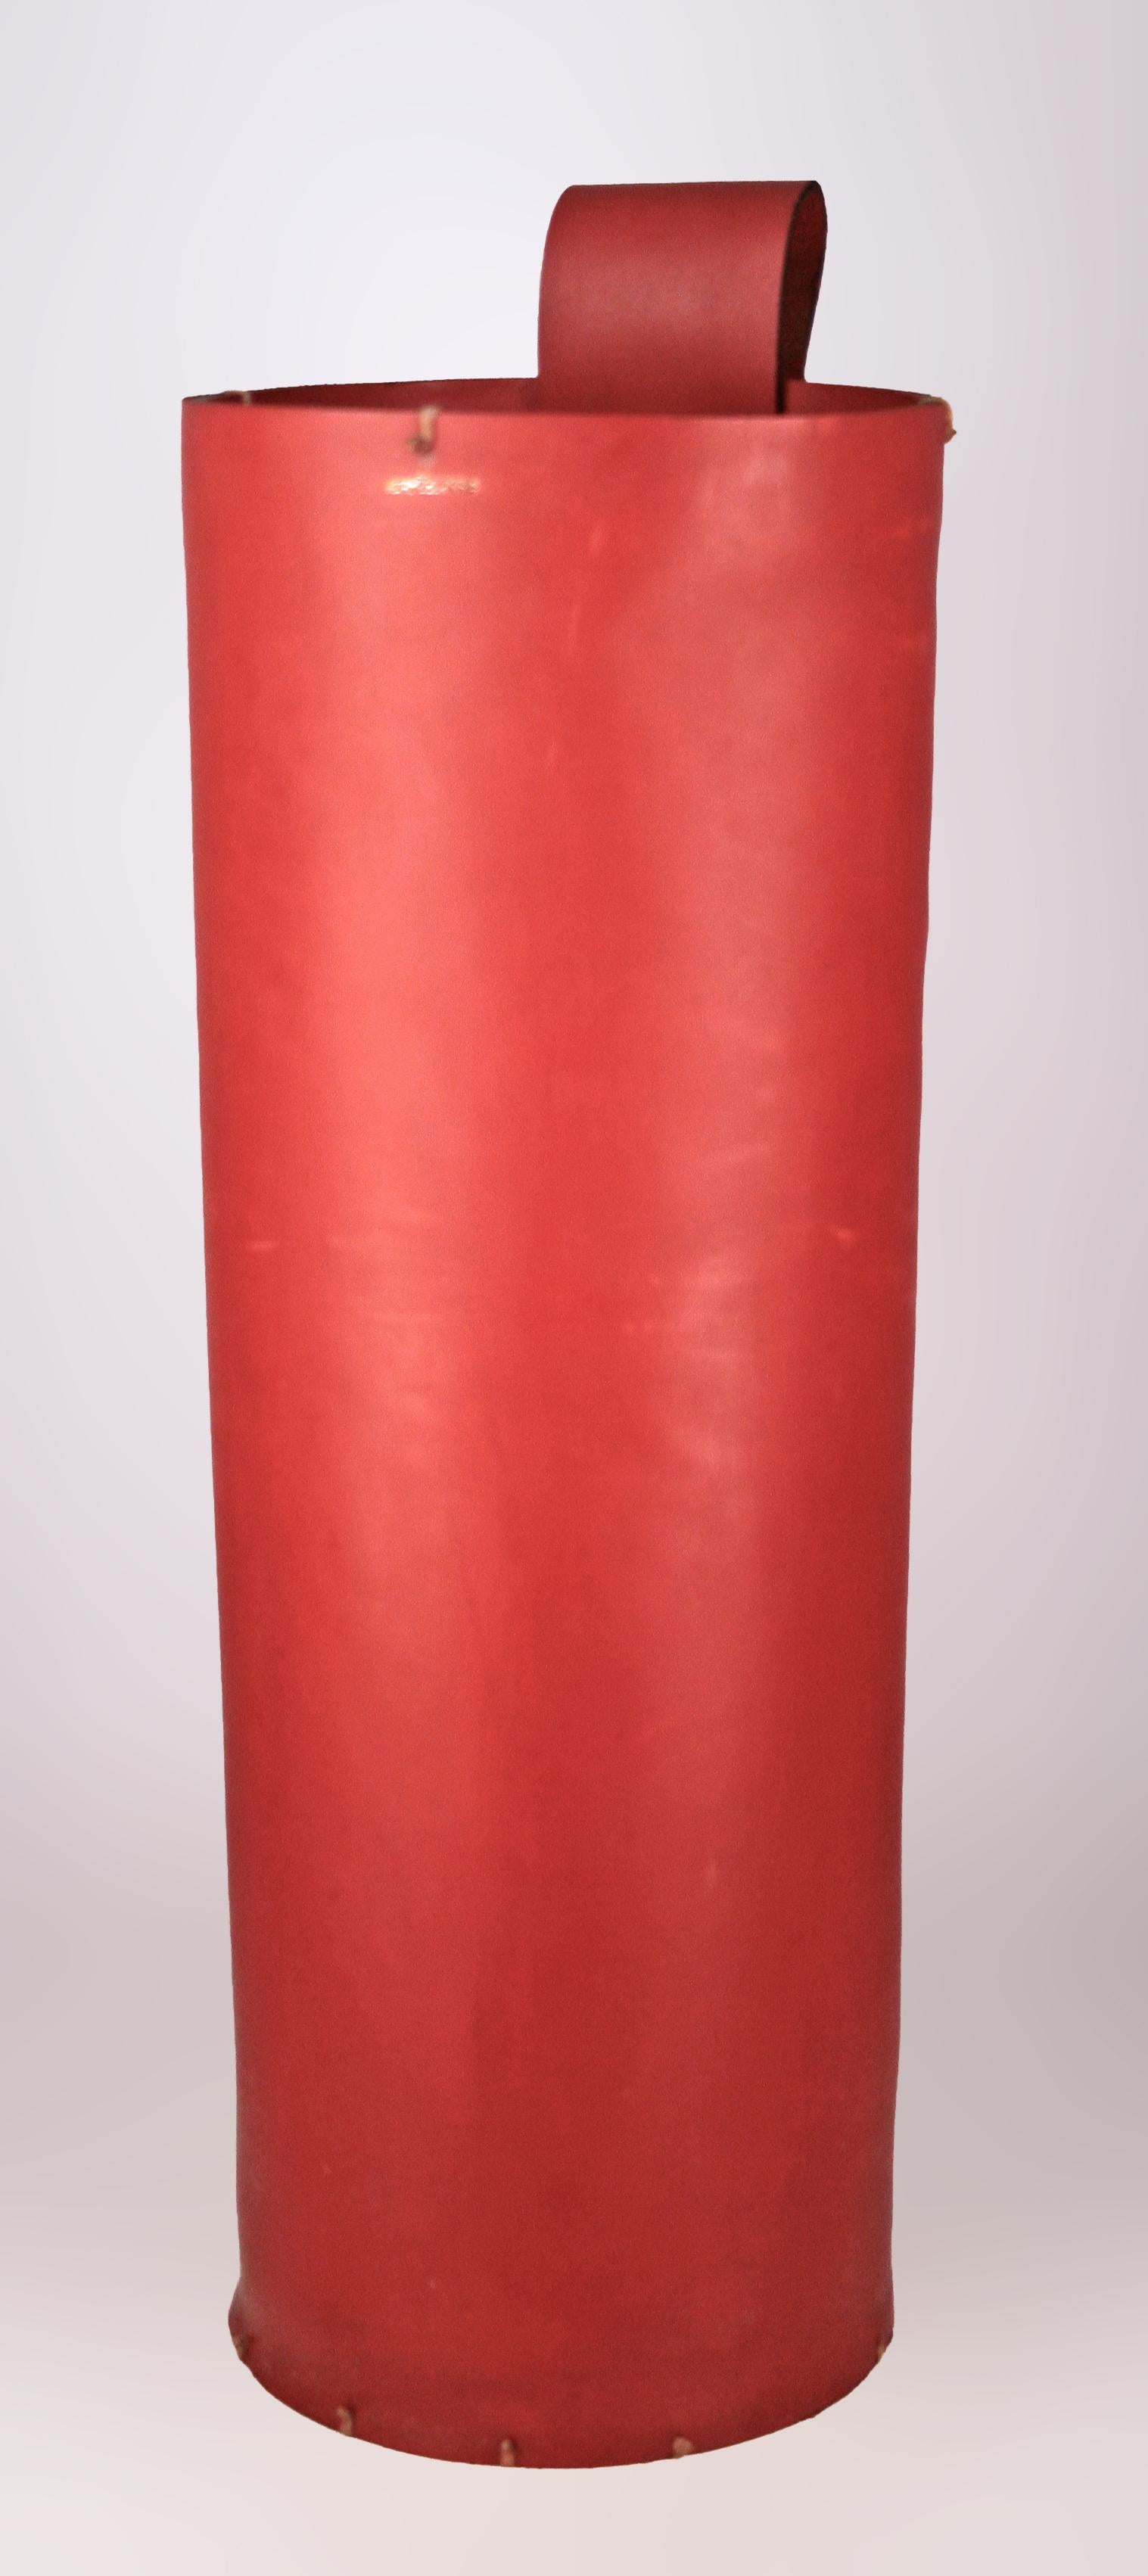 Mid-20th century Modern french red leather cylindrical umbrella stand by Hermès Paris

By: Hermès Paris
Material: leather, thread
Technique: dyed, carved, hand-carved
Dimensions: 8 in x 25.5 in
Date: mid-20th century
Style: Mid-Century Modern, Space